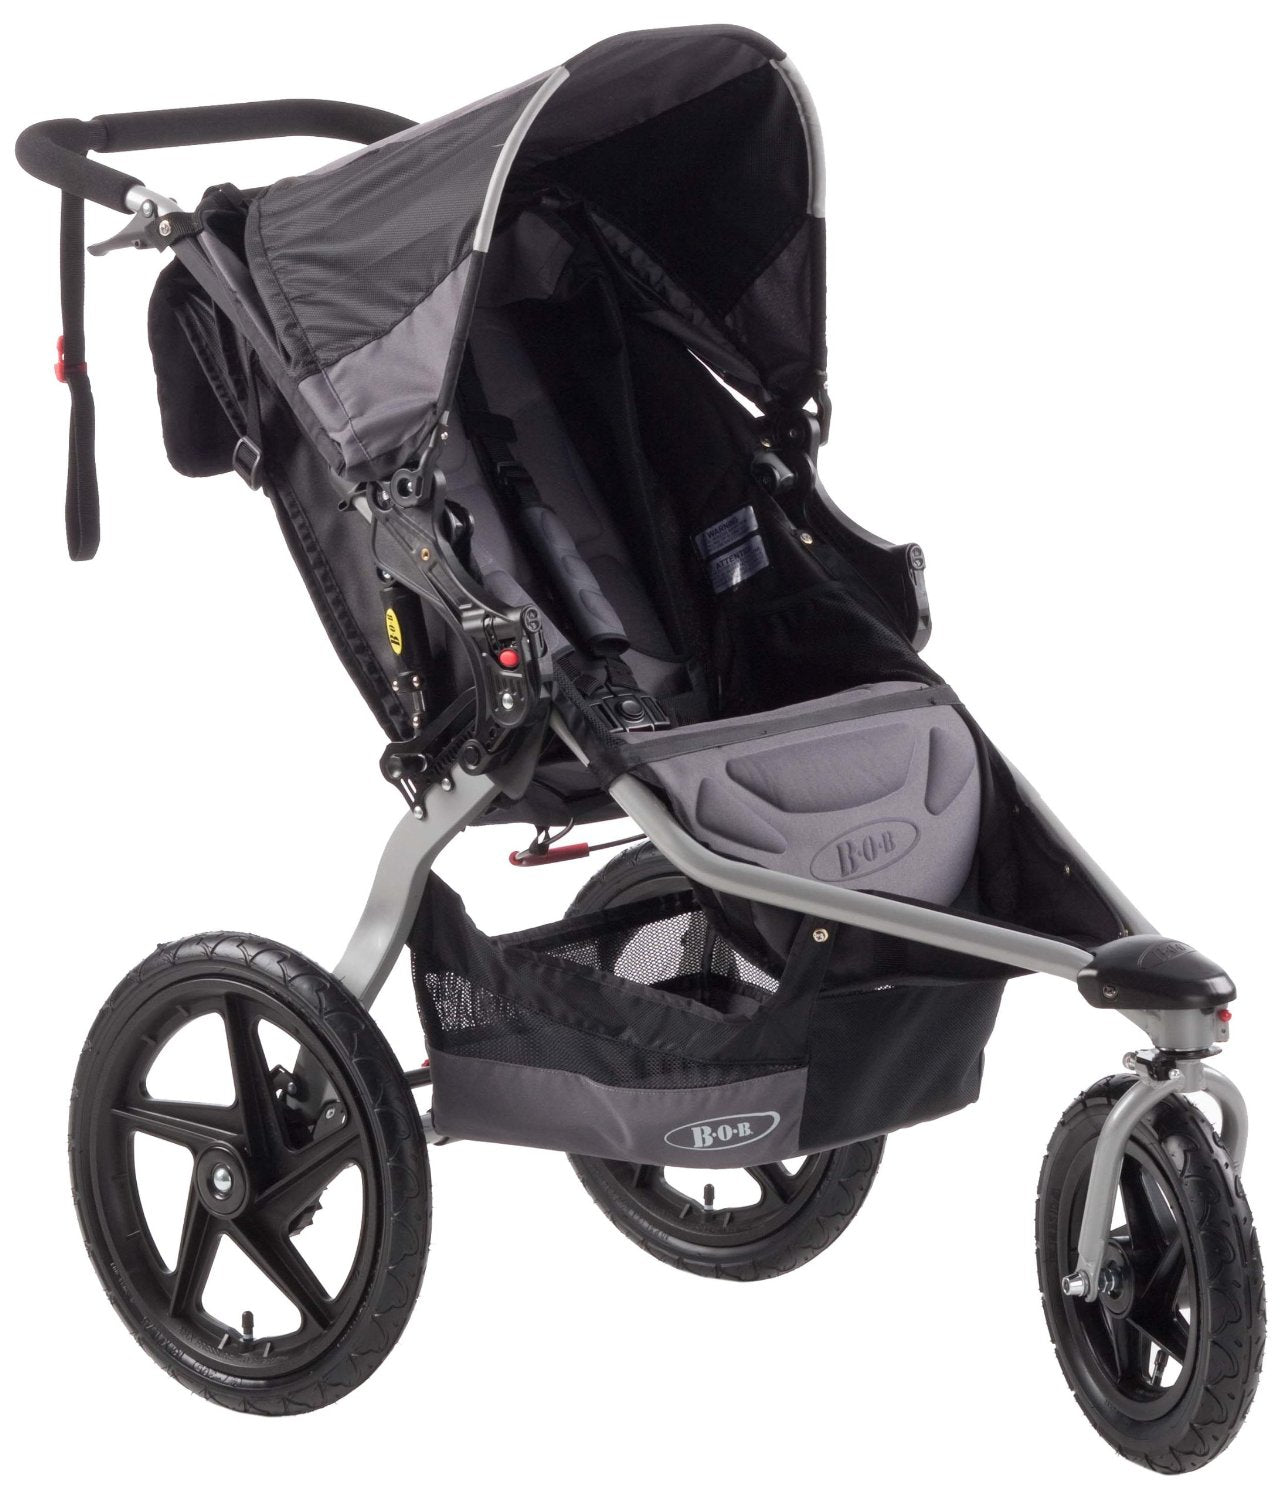 top rated pushchairs 2016